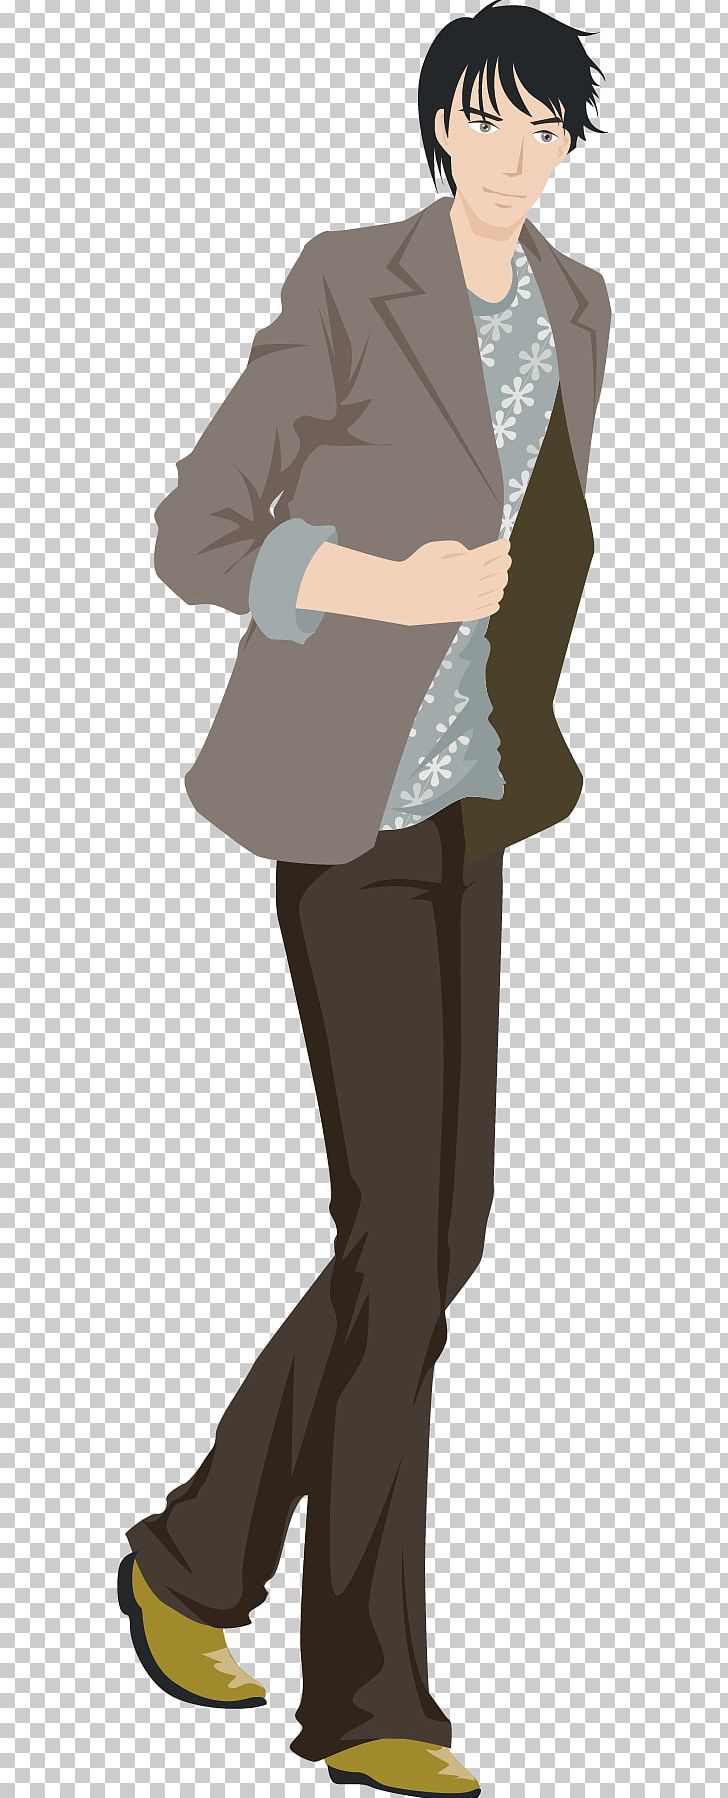 Business Casual White Transparent Anime Boy In Business Casual Anime  Boy Man PNG Image For Free Download